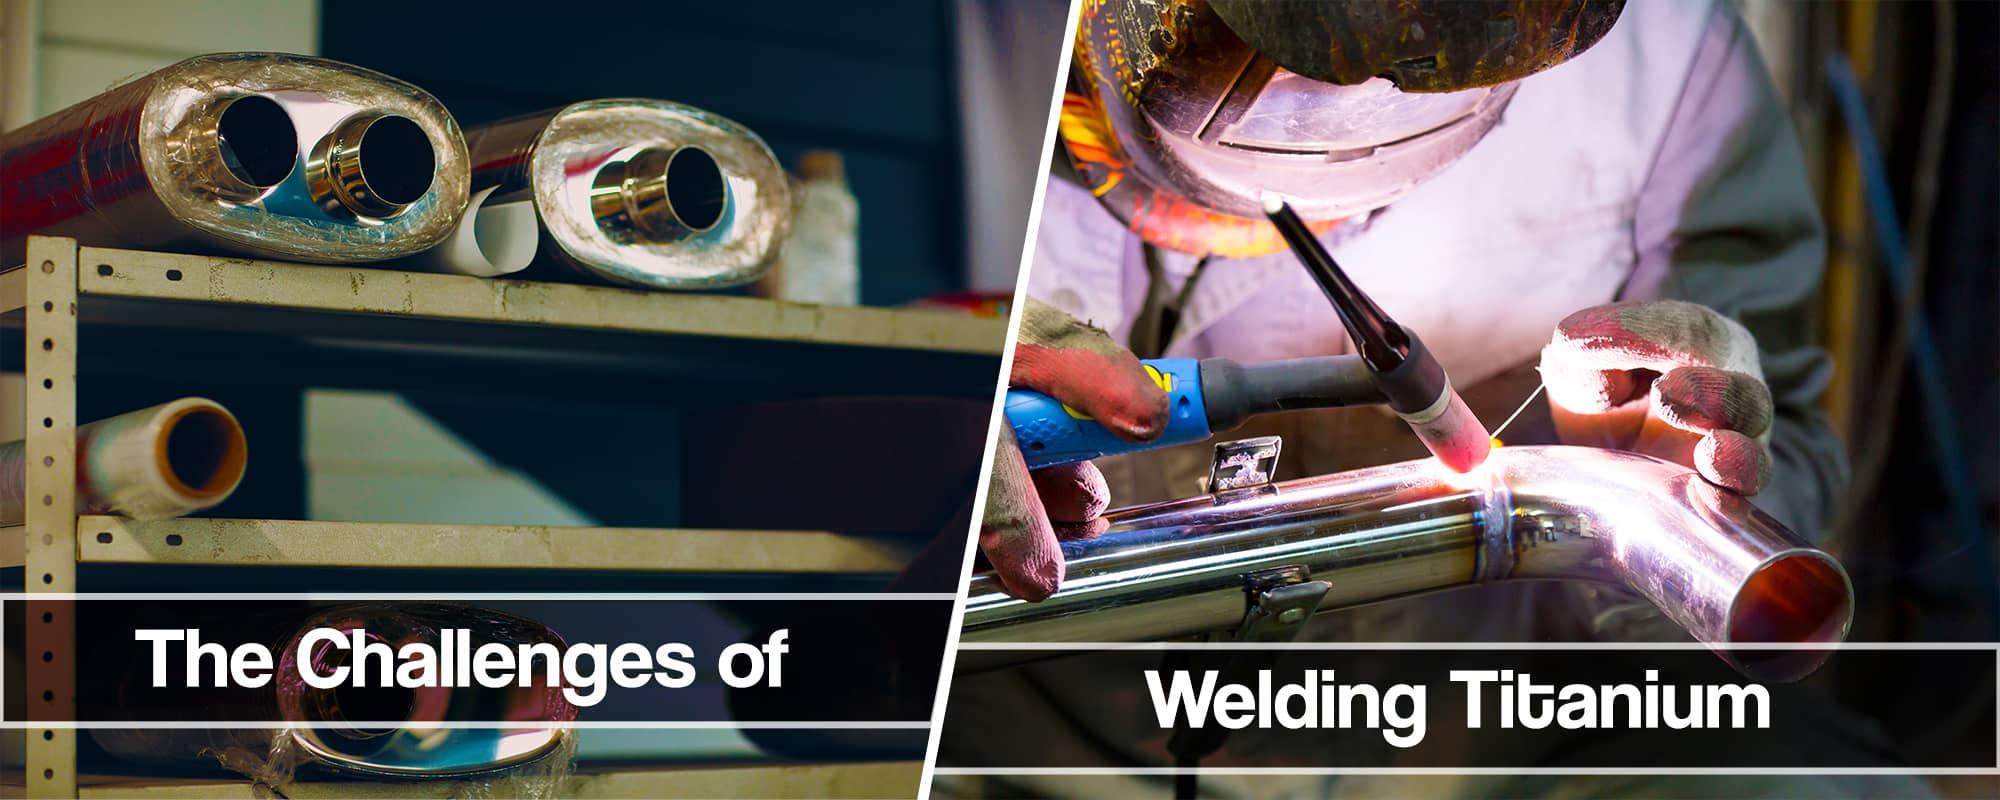 How To Weld Titanium? Challenges of Welding This Strong, Light, And Durable Metal Alloy